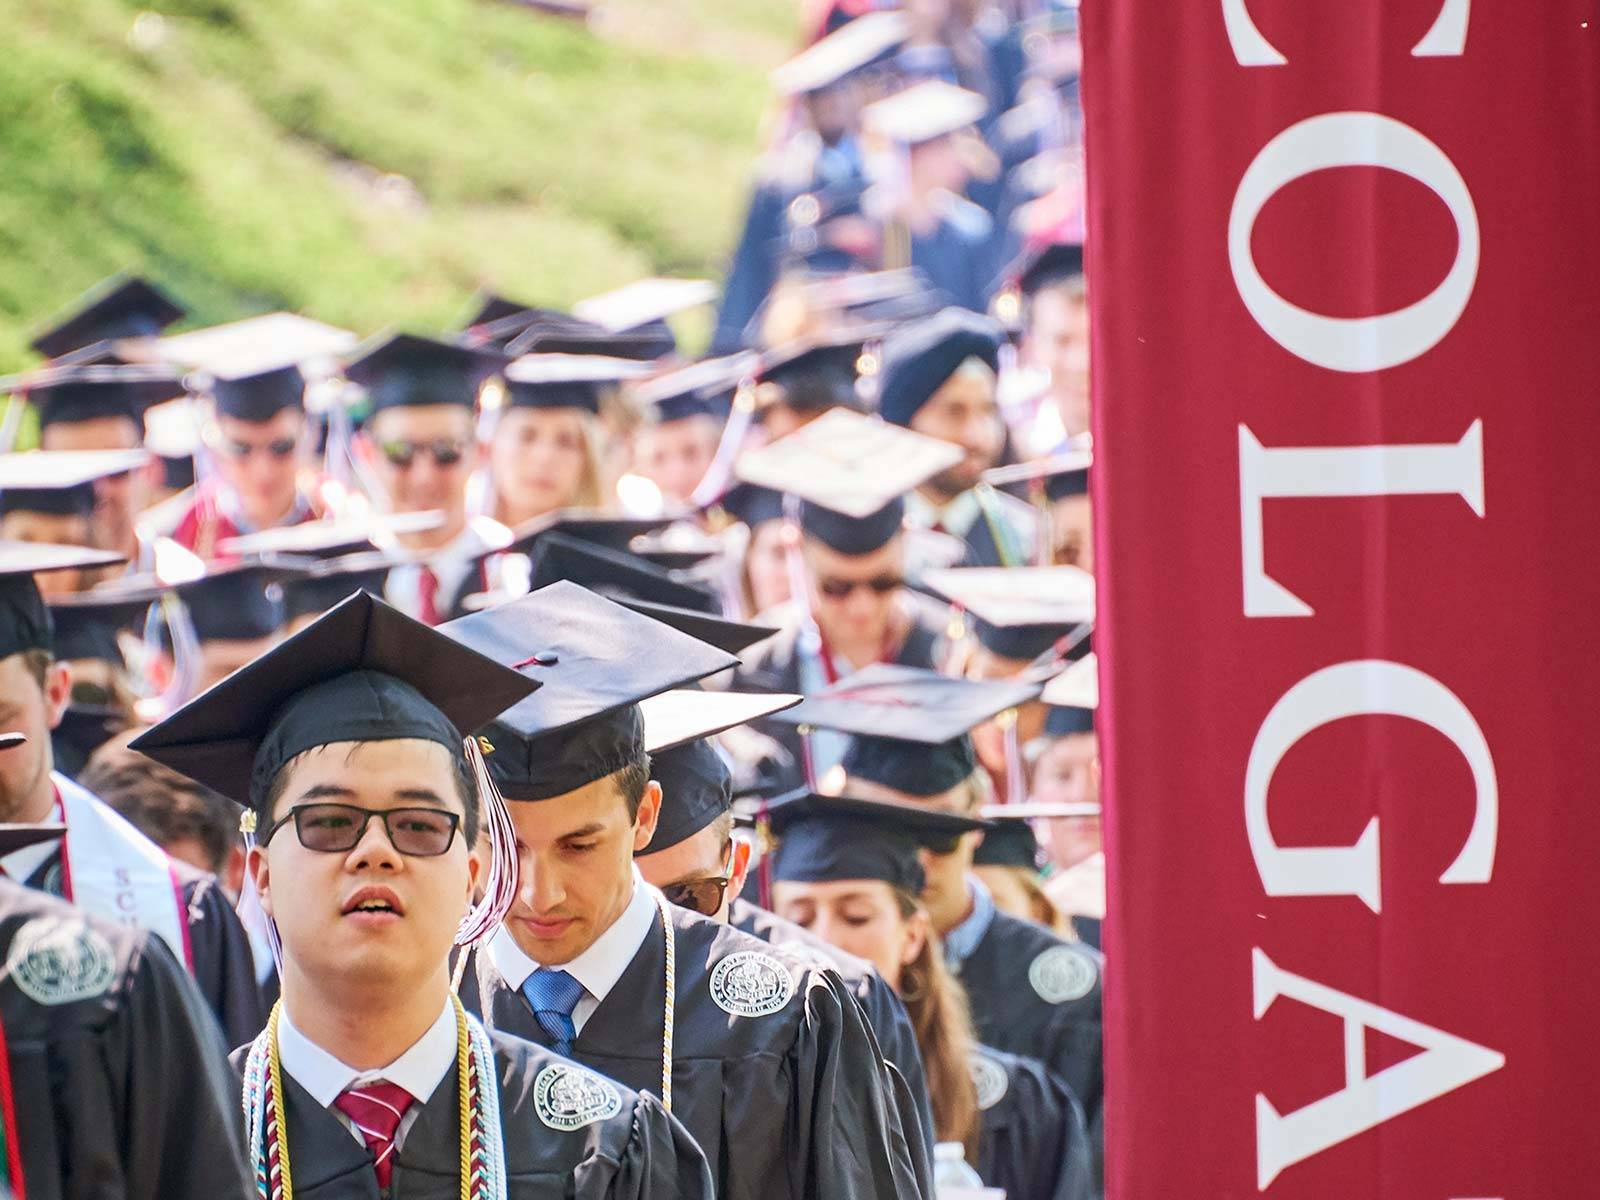 Students process into commencement 2019 past a Colgate Banner